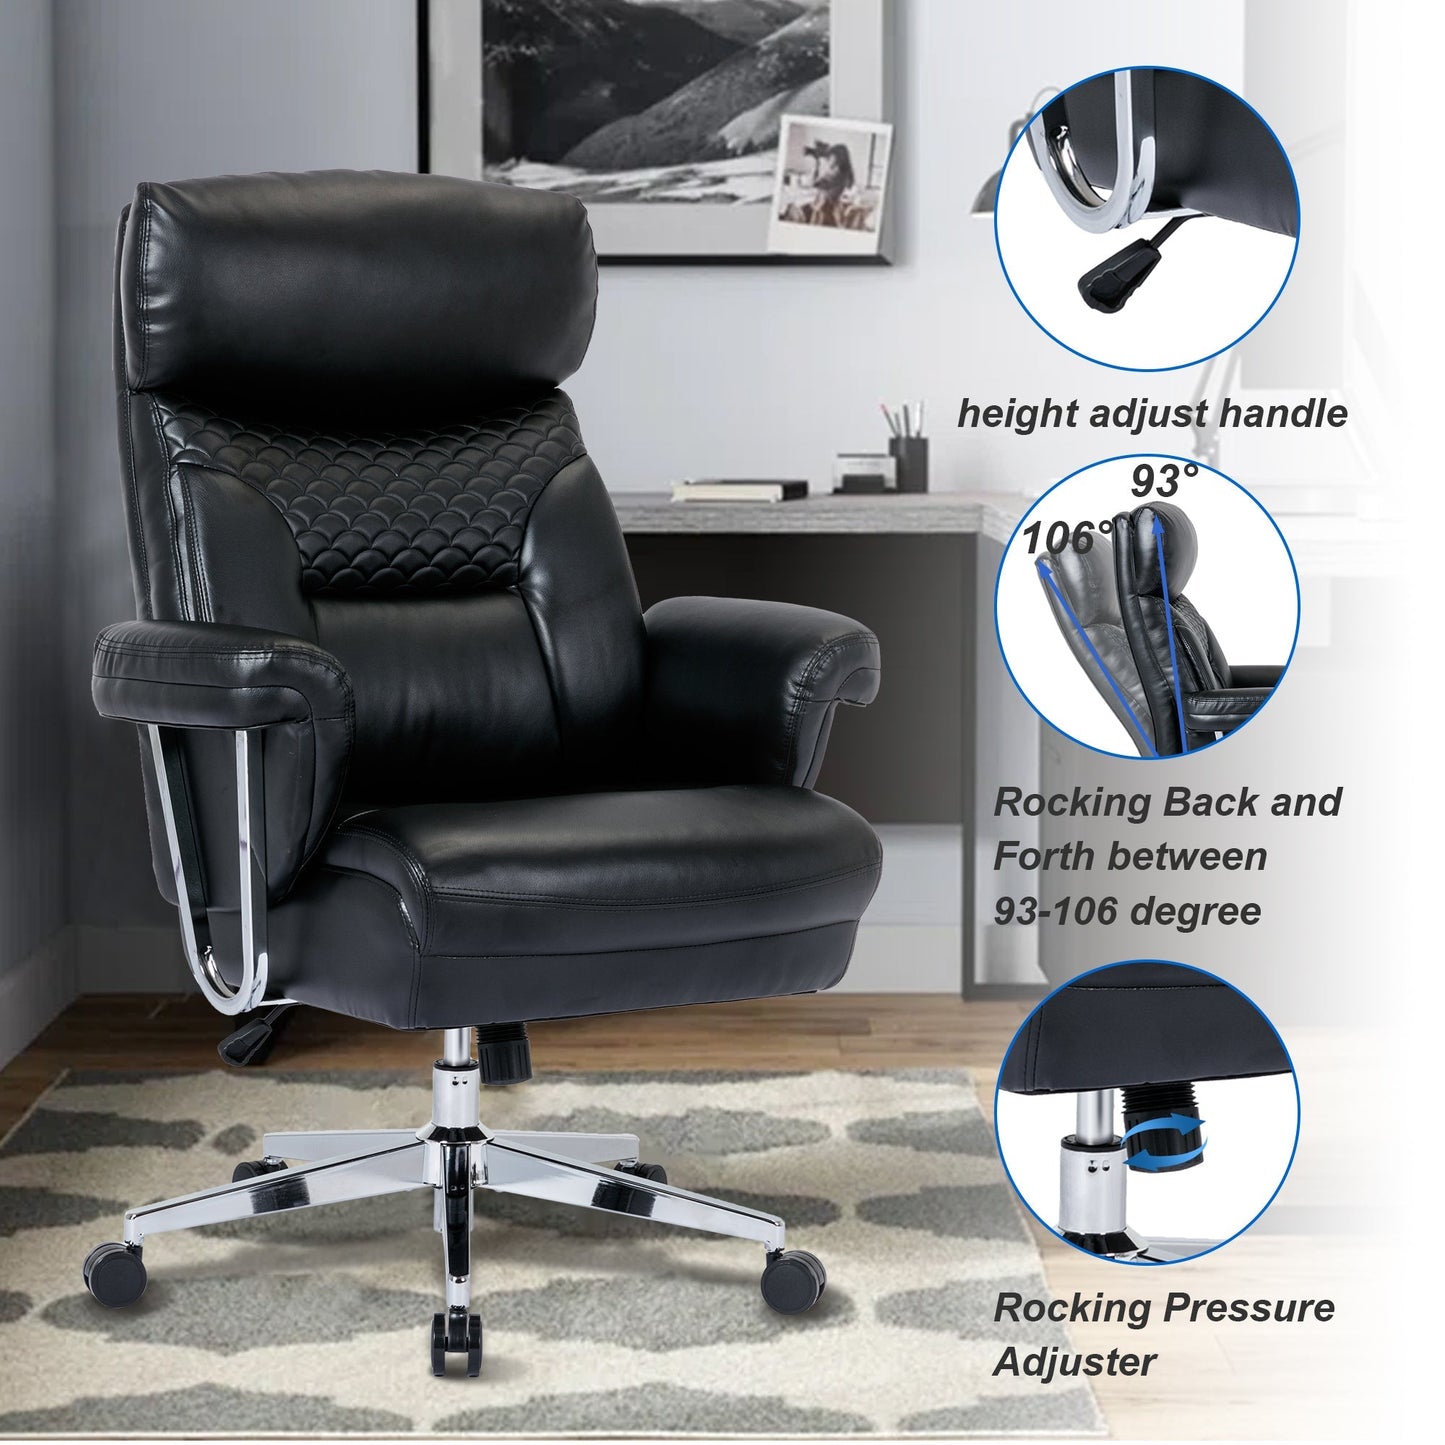 High Back Executive Office Chair 300lbs-Ergonomic Leather Computer Desk Chair , Thick Bonded Leather Office Chair for Comfort and Lumbar Support, Adjustable Rock Back Tension(black)